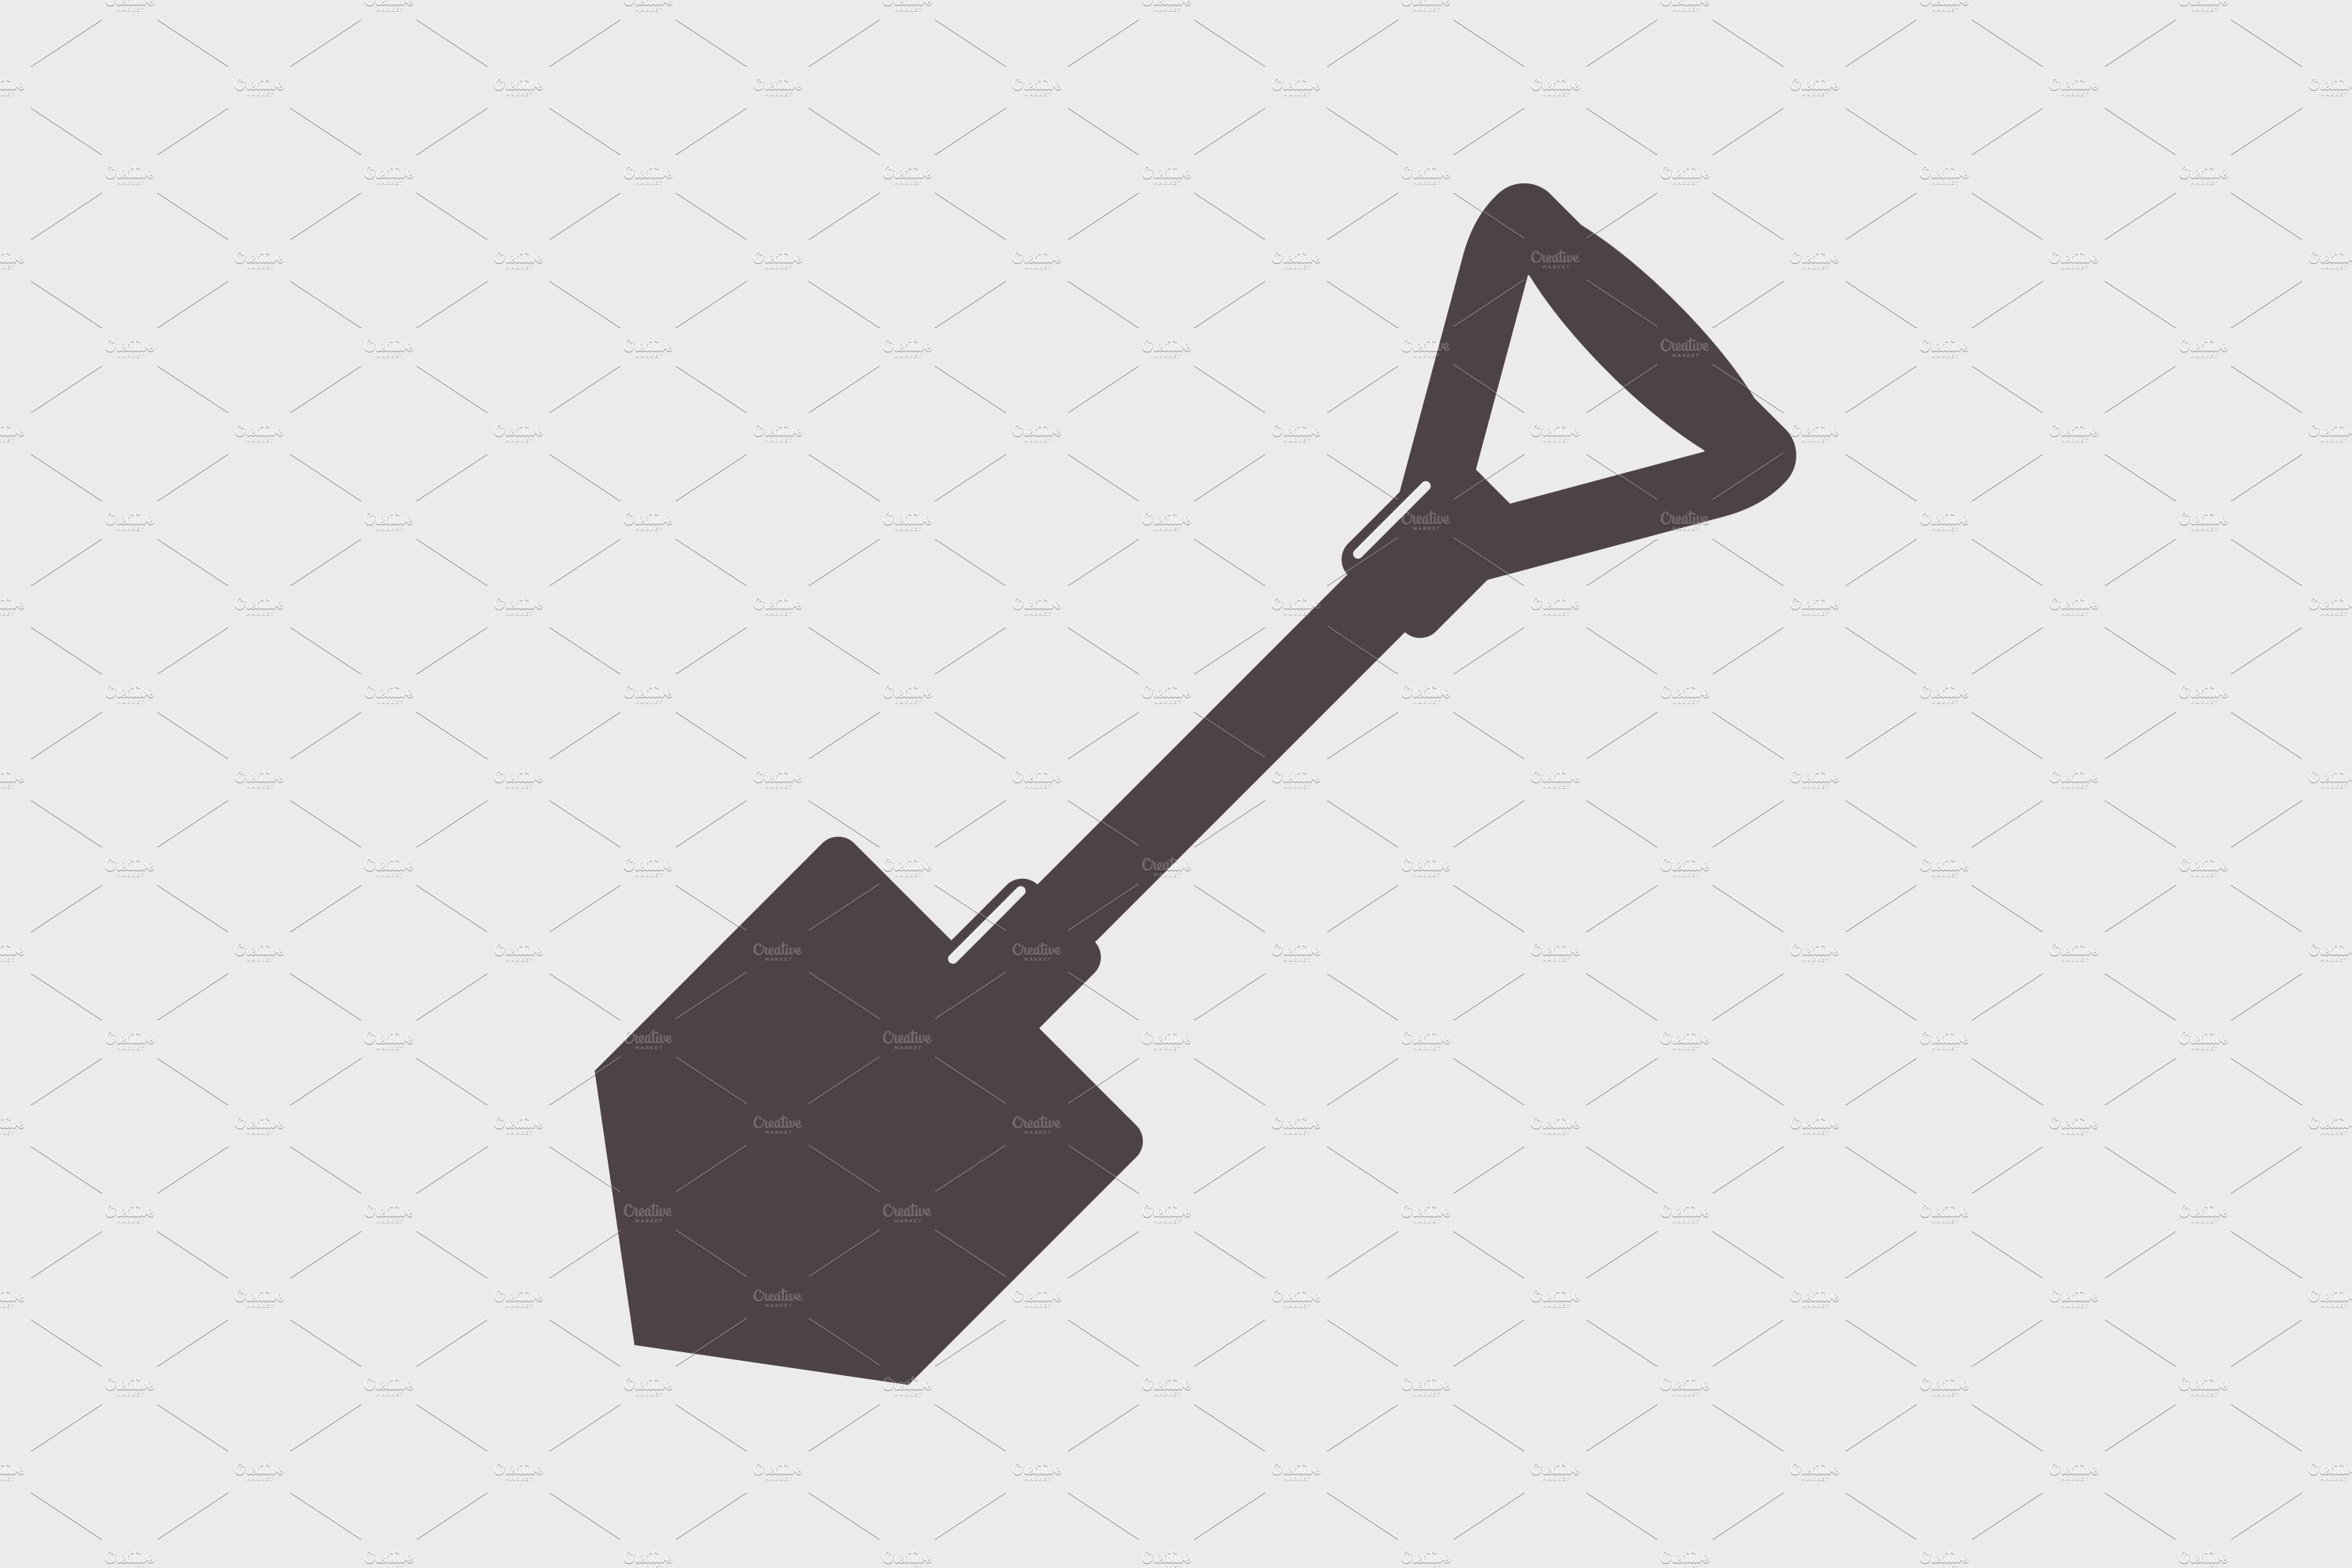 Shovel with handle tool icon on a gr cover image.